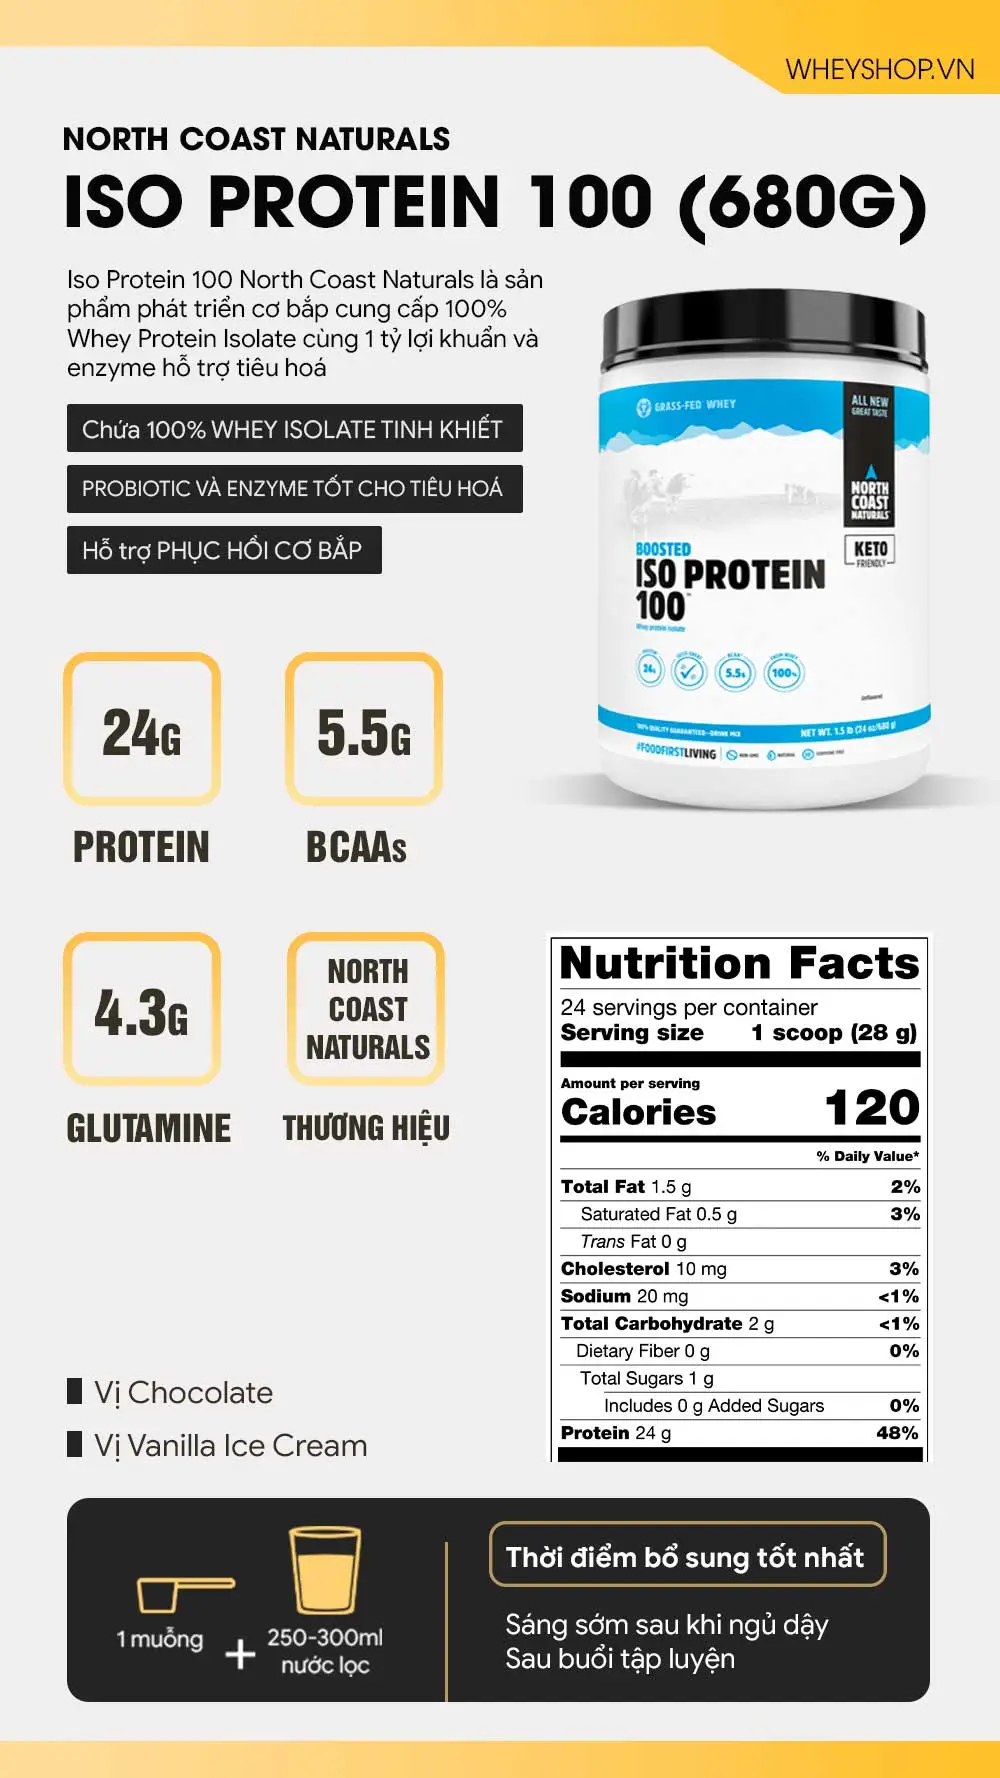 boosted-iso-protein-100-1-5lbs-680g